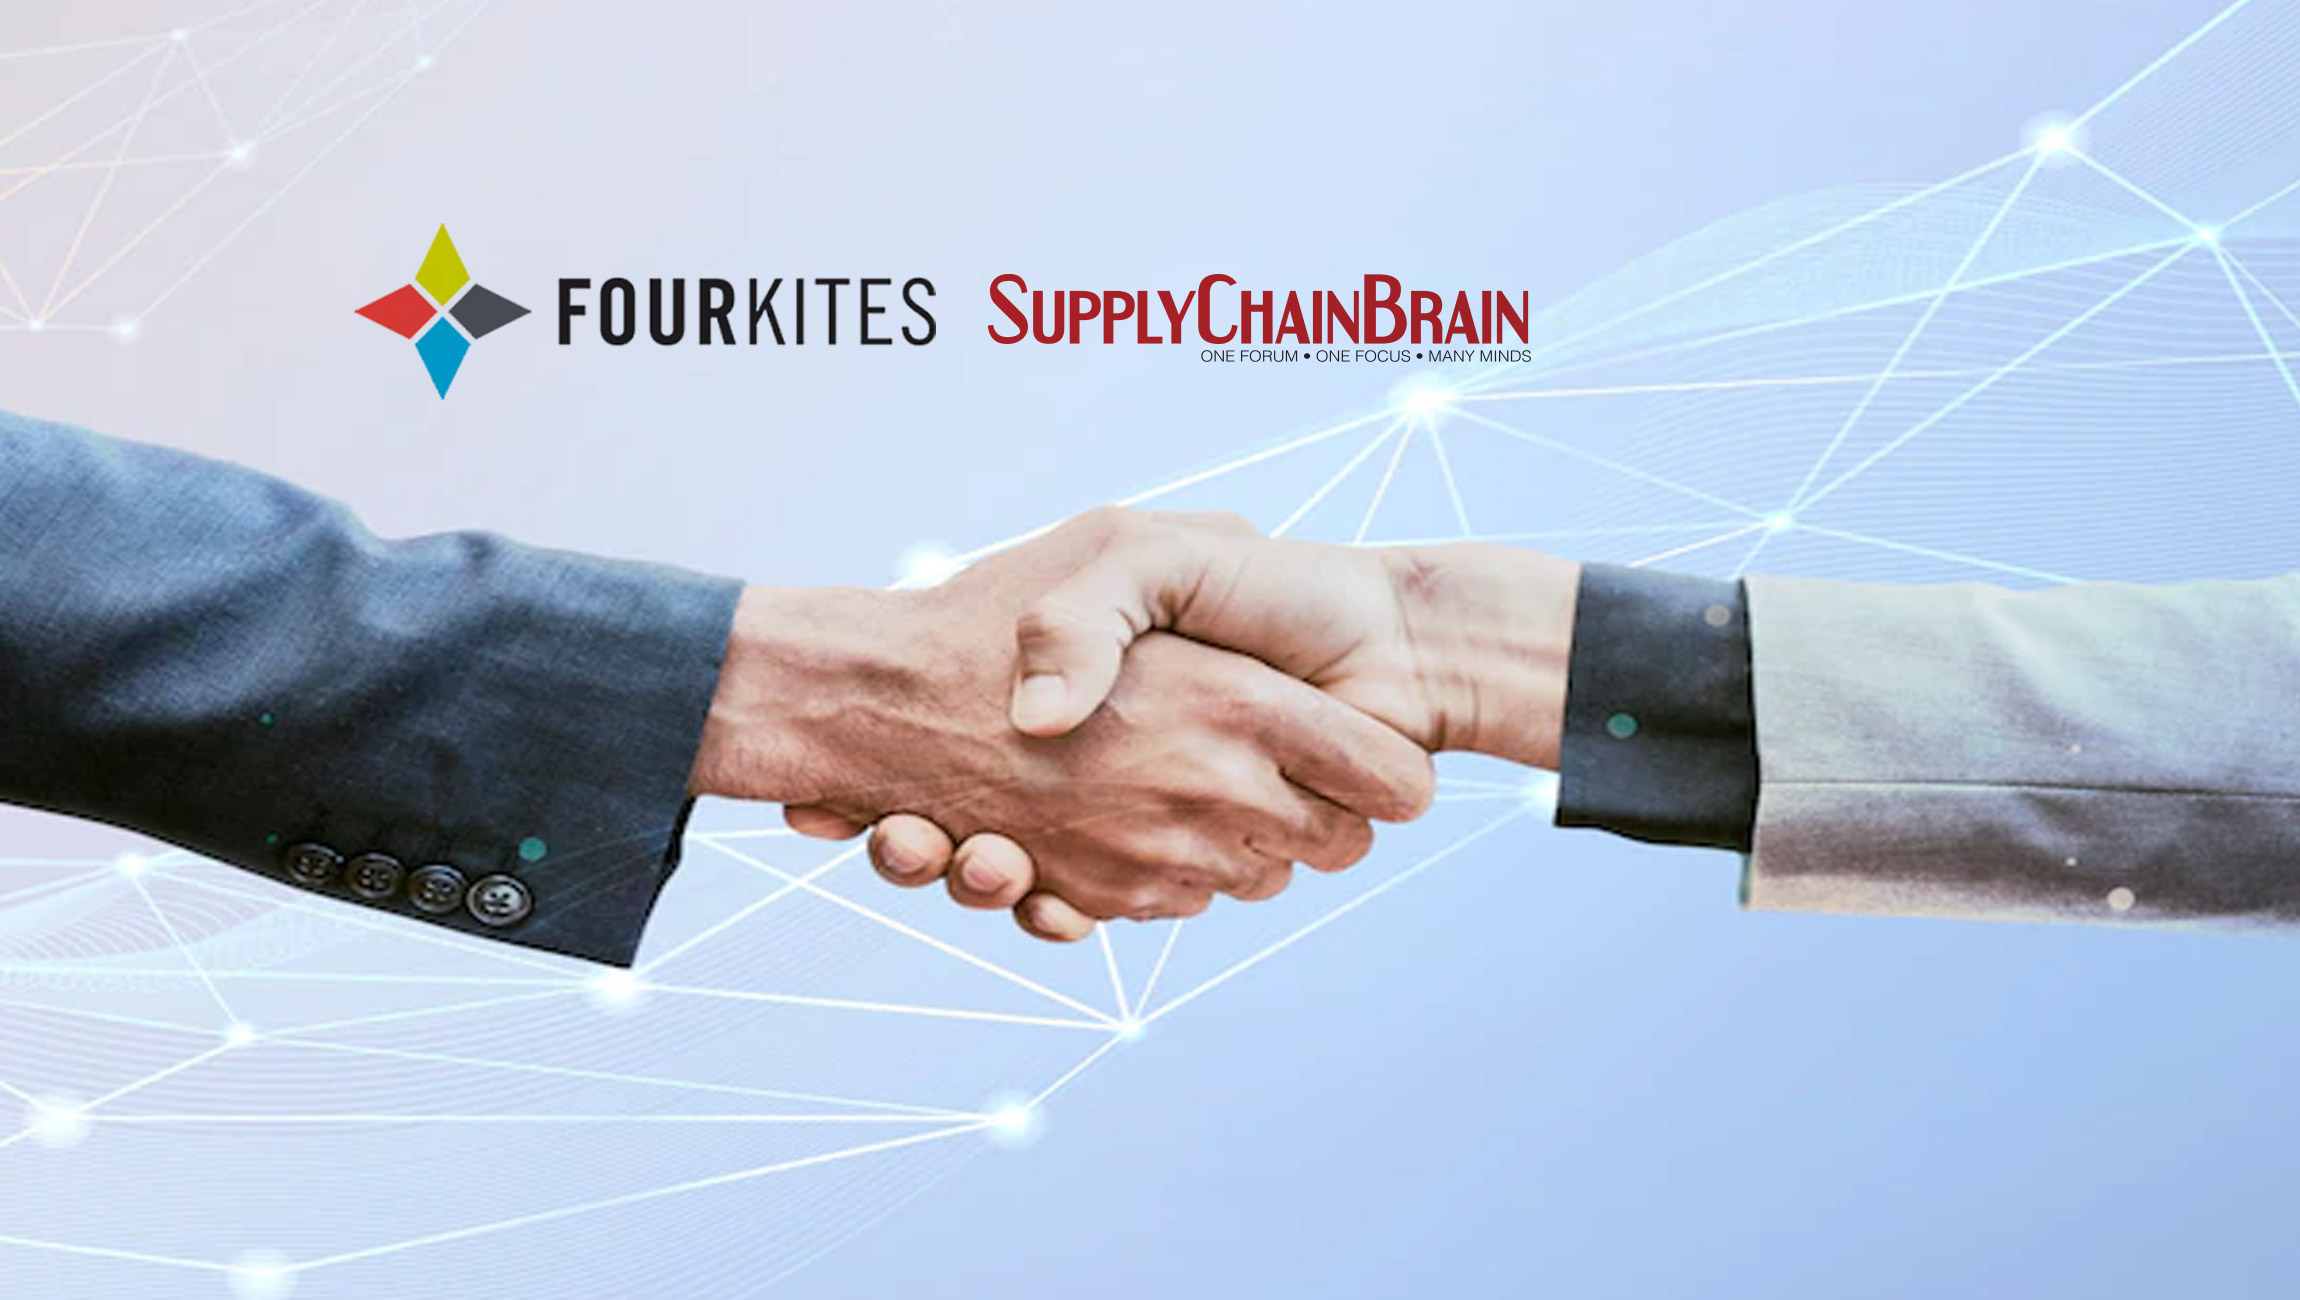 Leading Supply Chain Visibility Company FourKites Recognized as a 2022 Great Supply Chain Partner